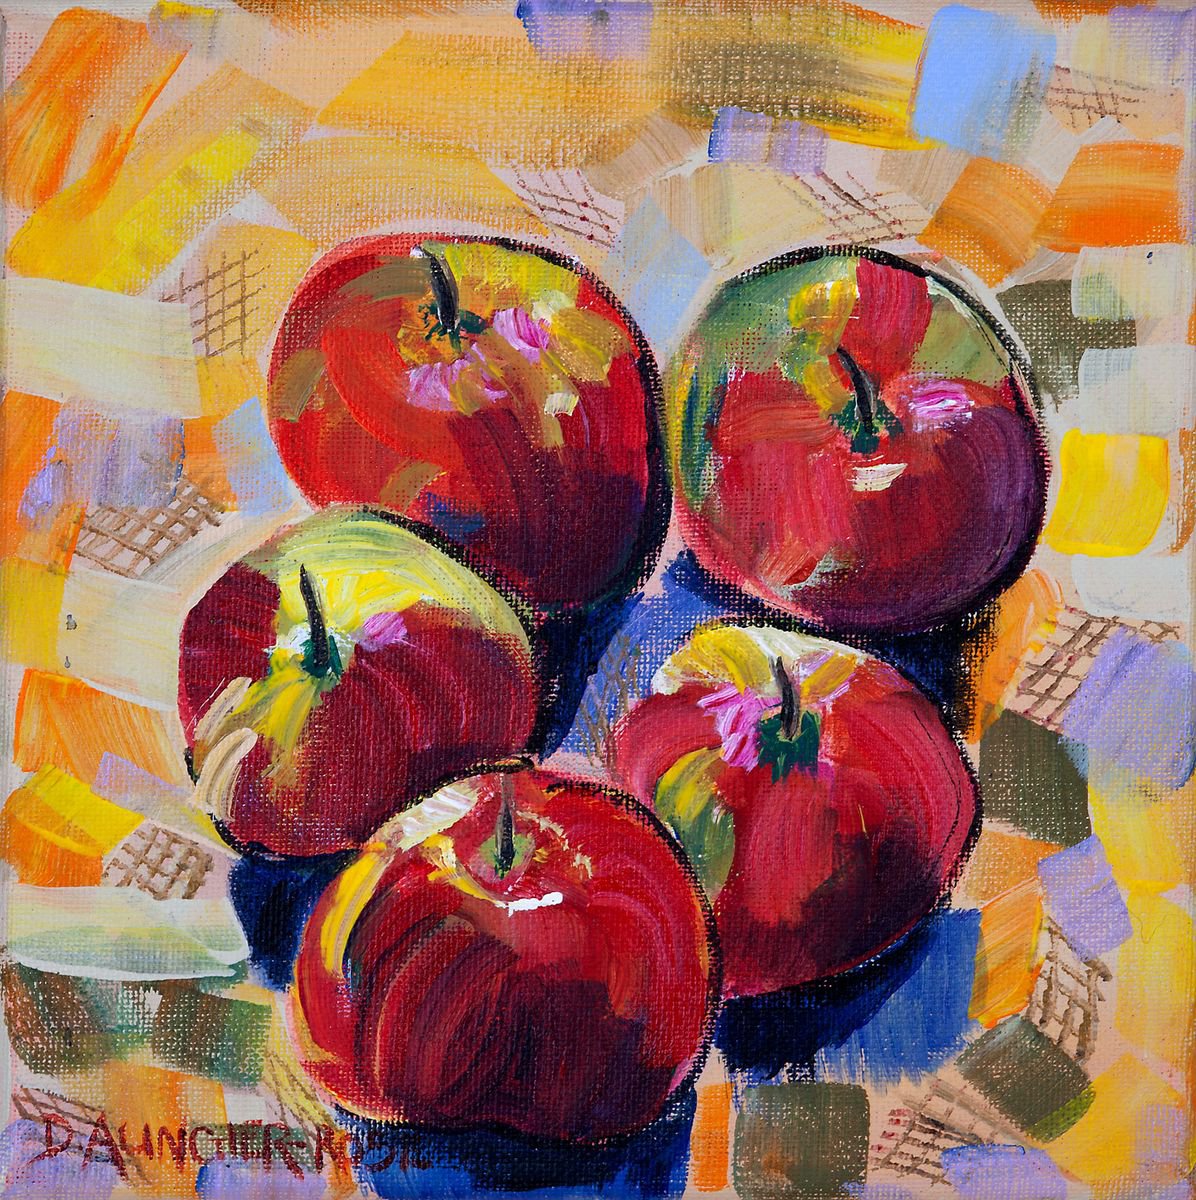 FIVE APPLES by Diana Aungier-Rose